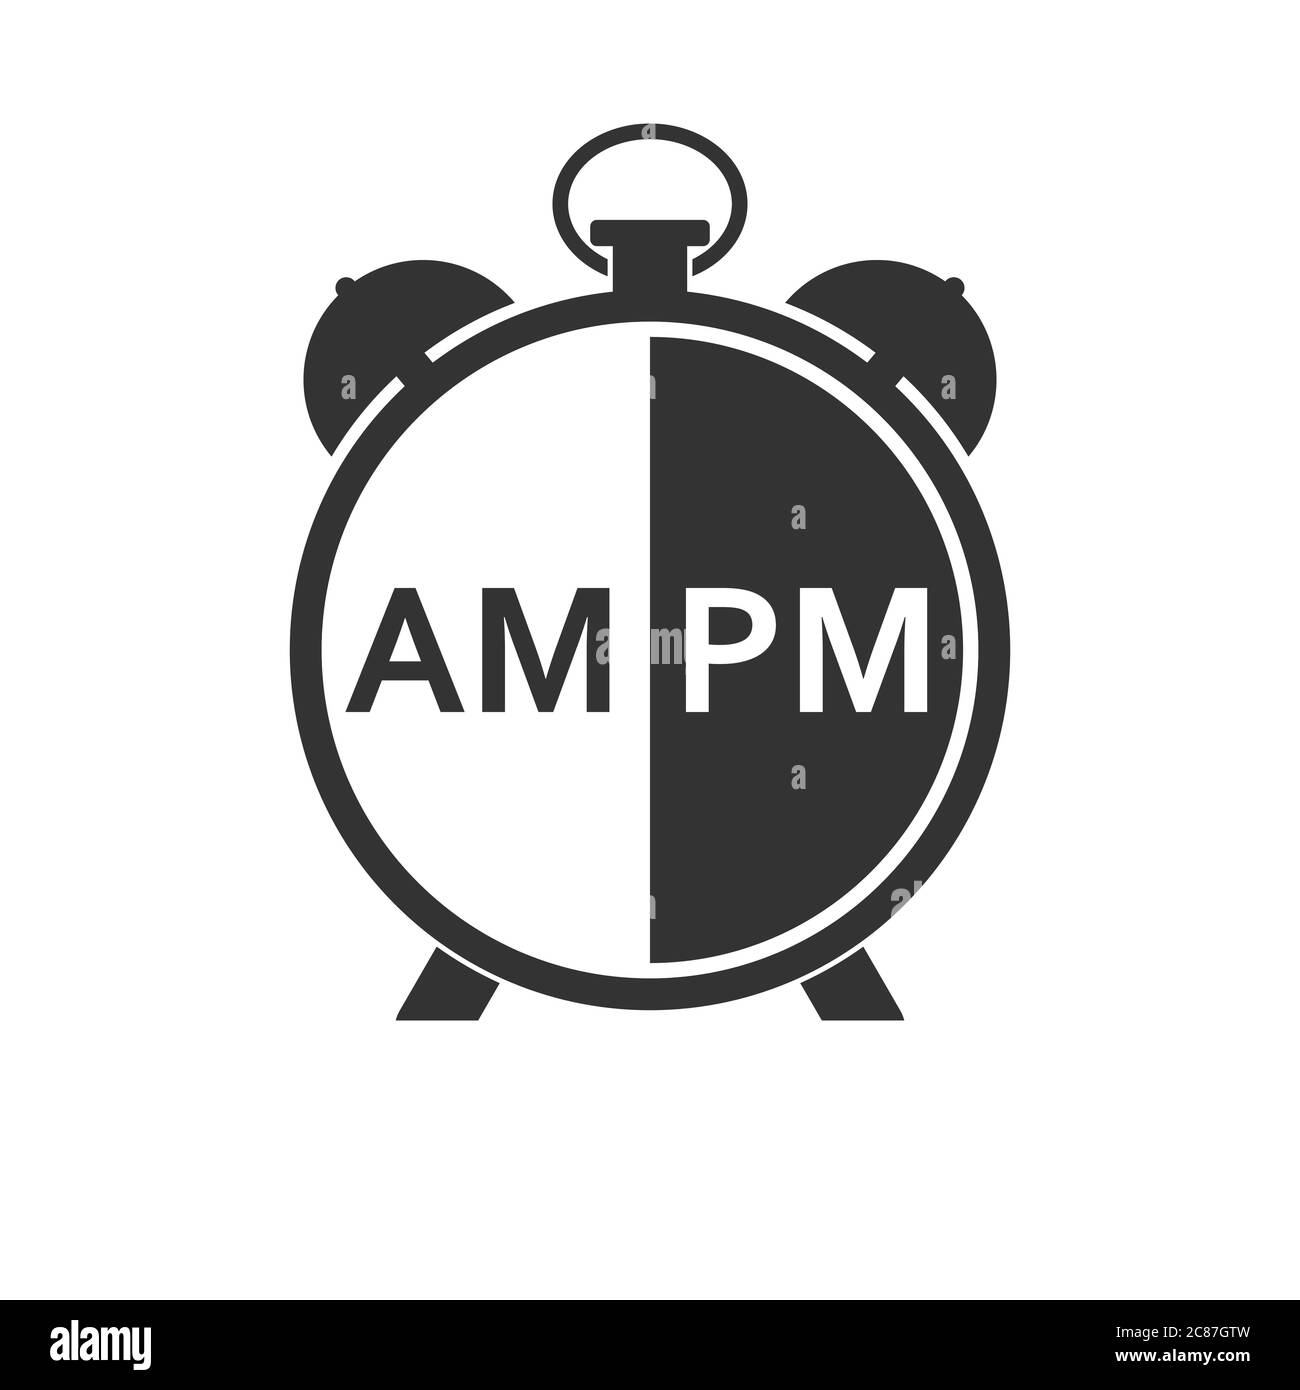 Abbreviations for hours before noon and after noon on the clock face, isolated on a white background Stock Vector